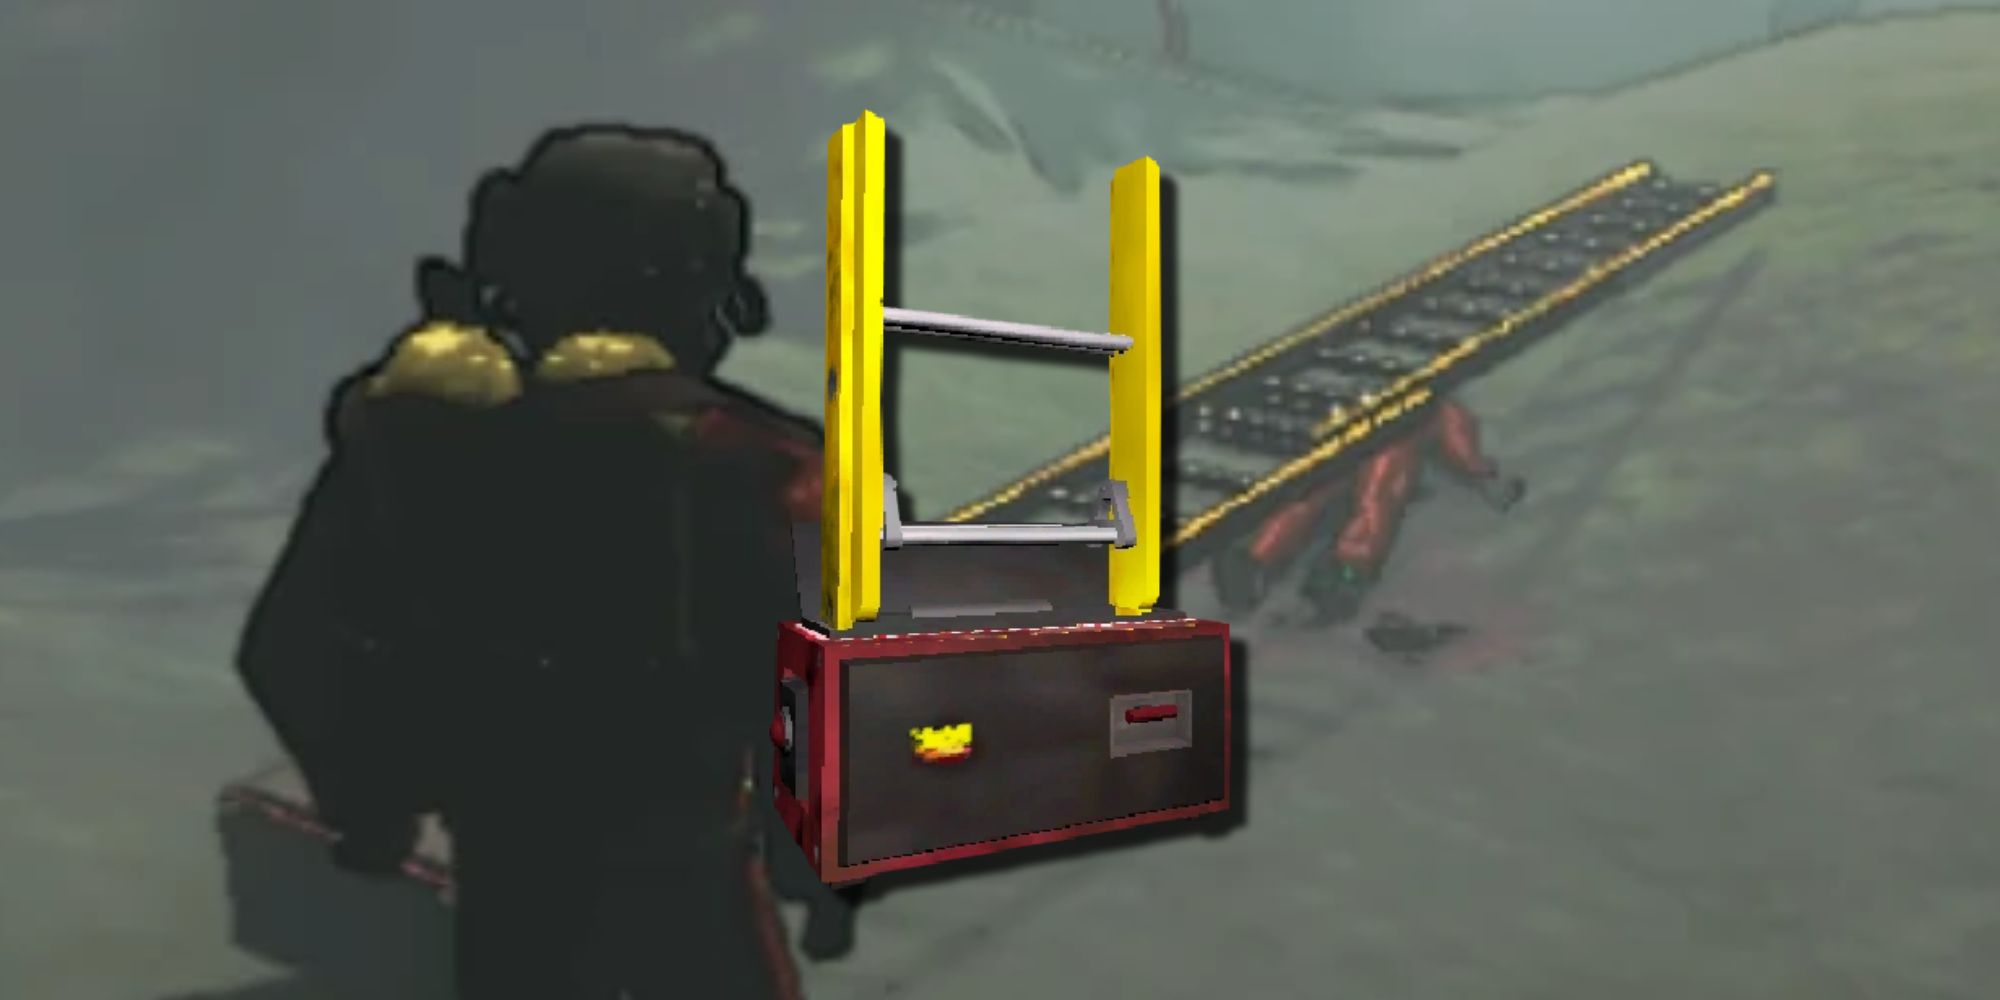 A player uses the extension ladder as a weapon against their crewmate to kill them